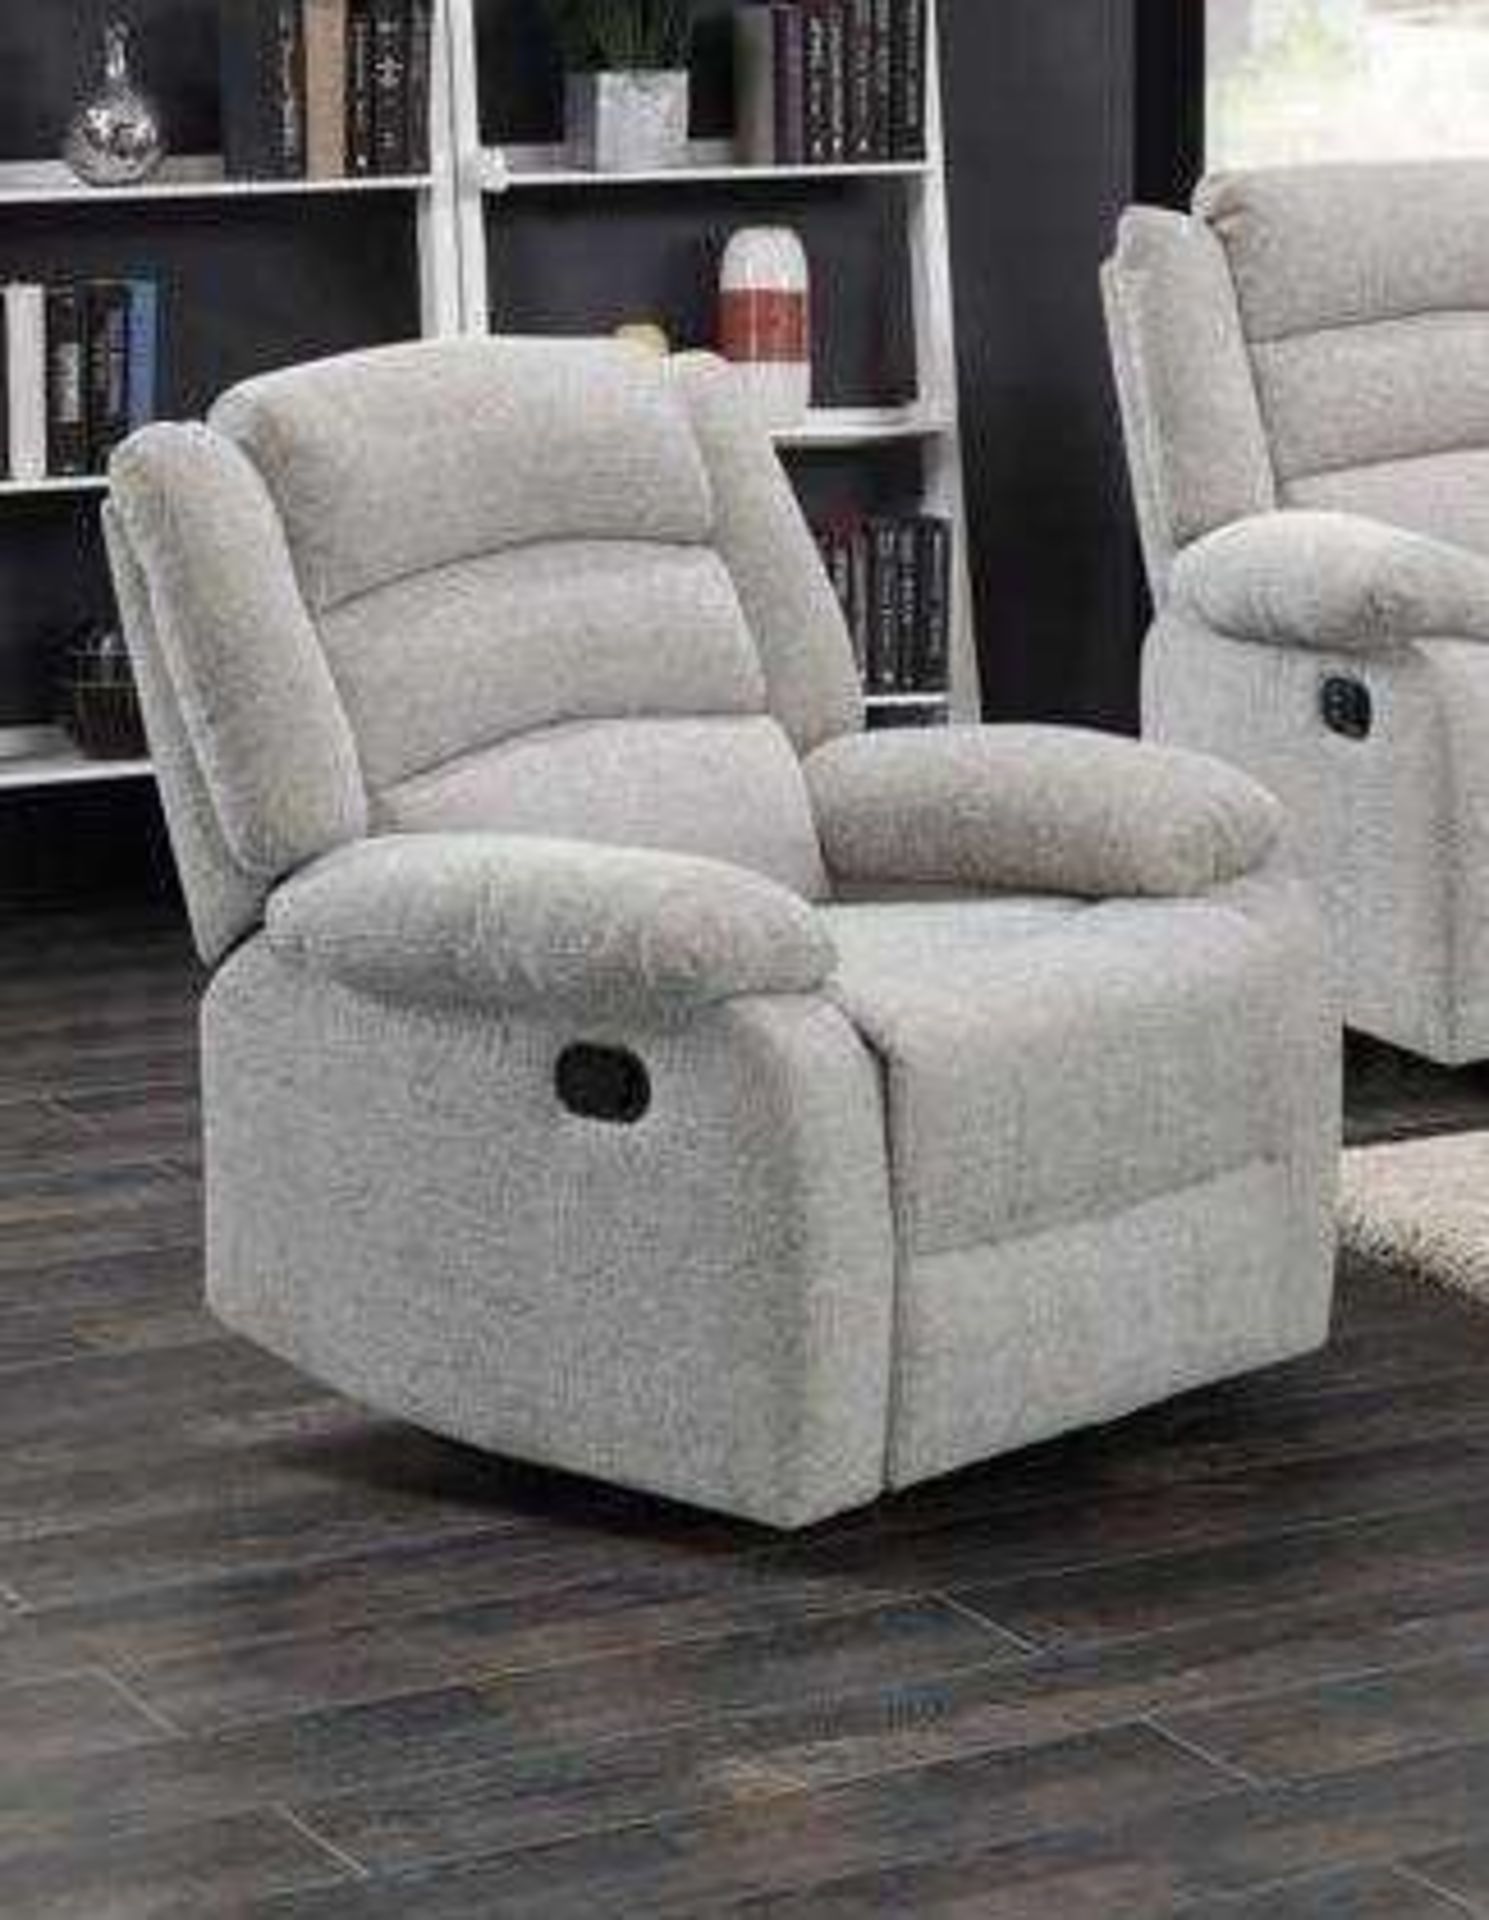 BRAND NEW & BOXED Malaga recliner chair in Natural.